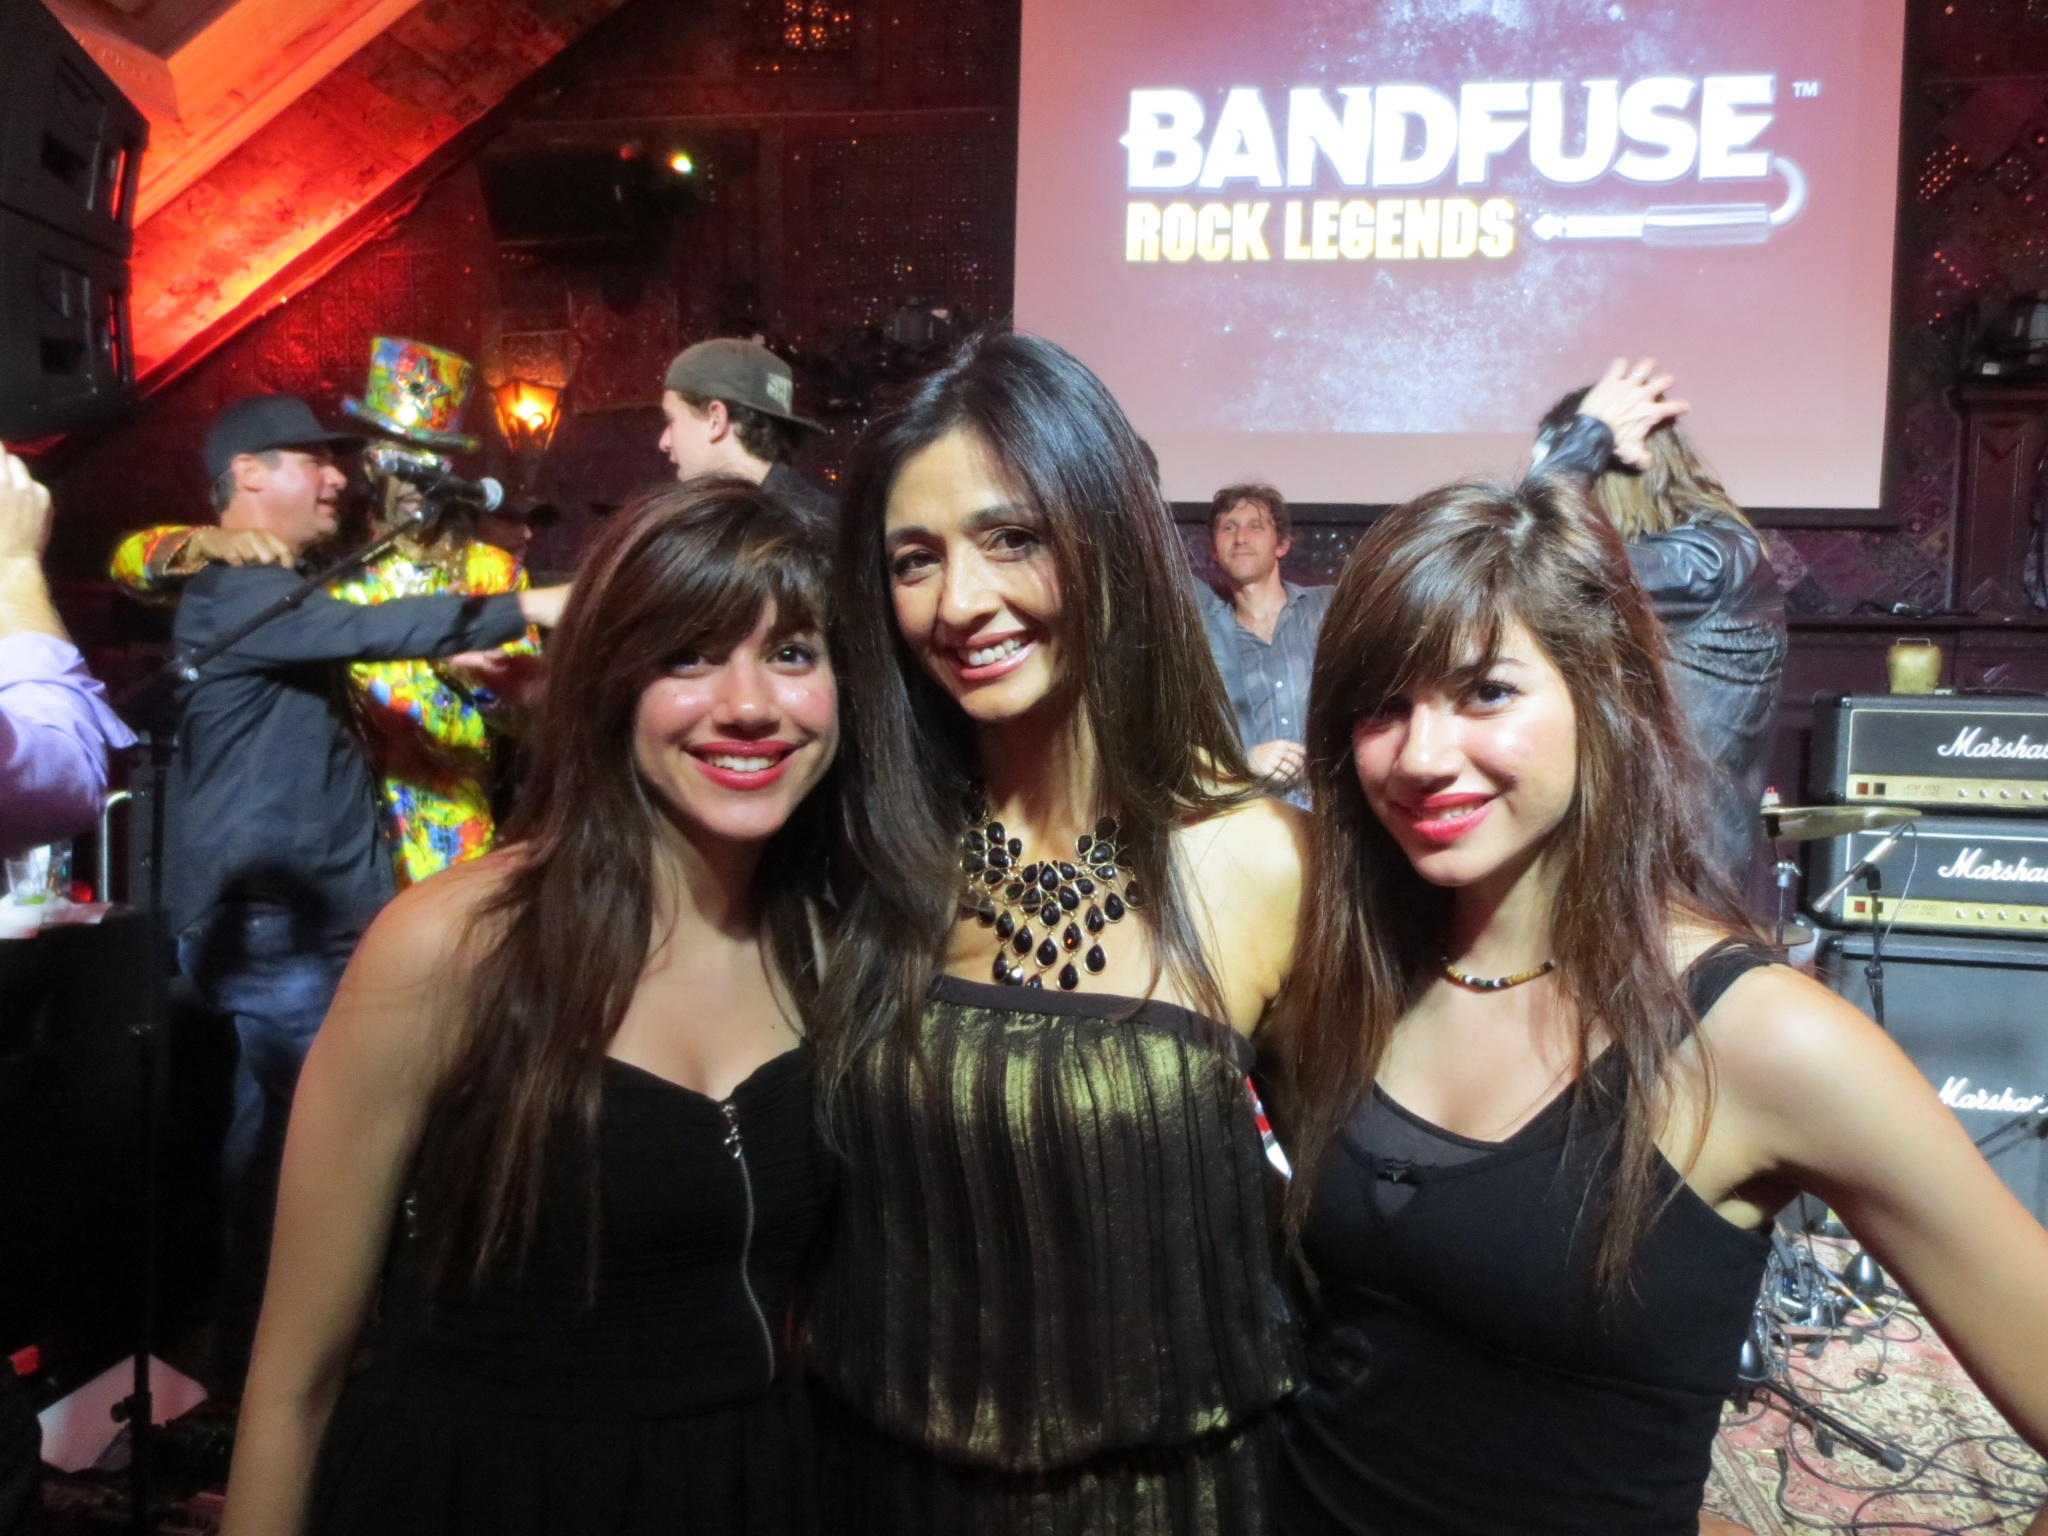 BandFuse at the House of Blues